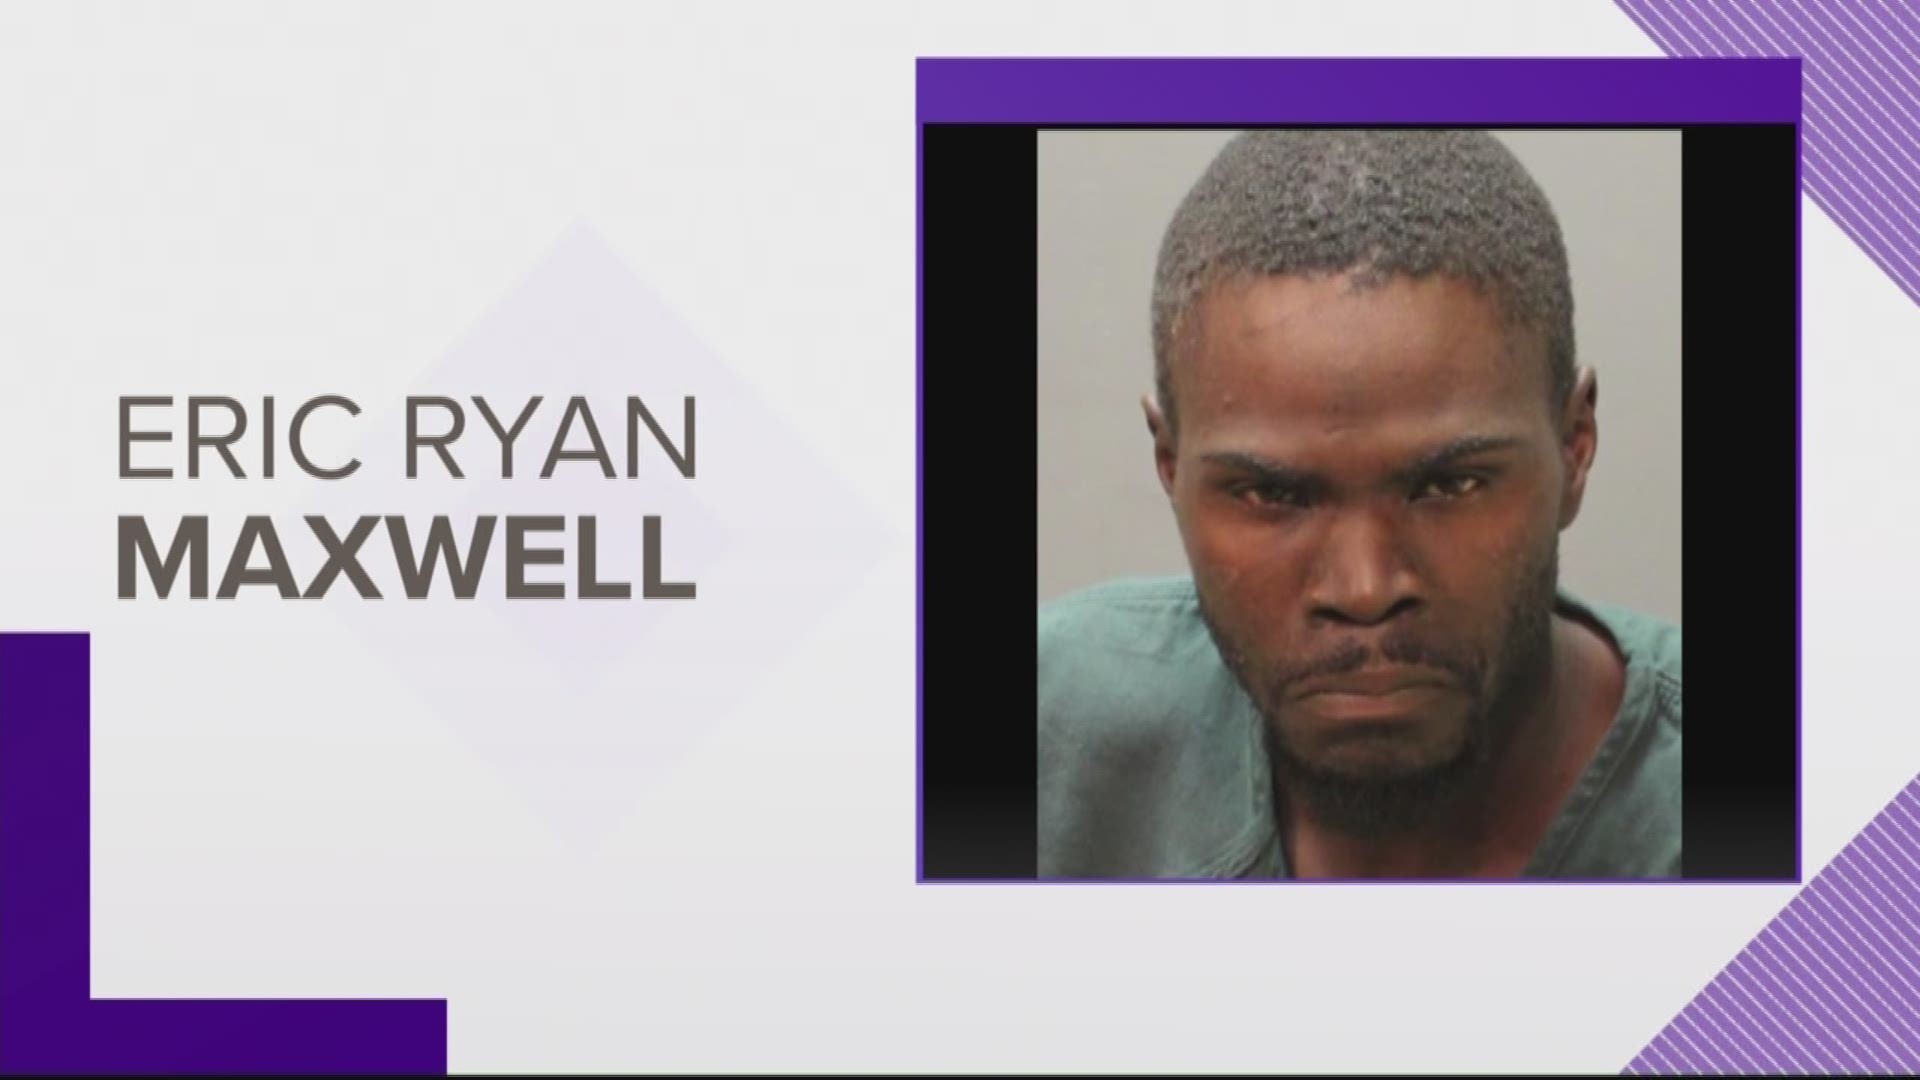 Eric Ryan Maxwell is believed to be a transient individual and is known to frequent the Broward Road and Interstate-95 areas of Jacksonville's northside, police said